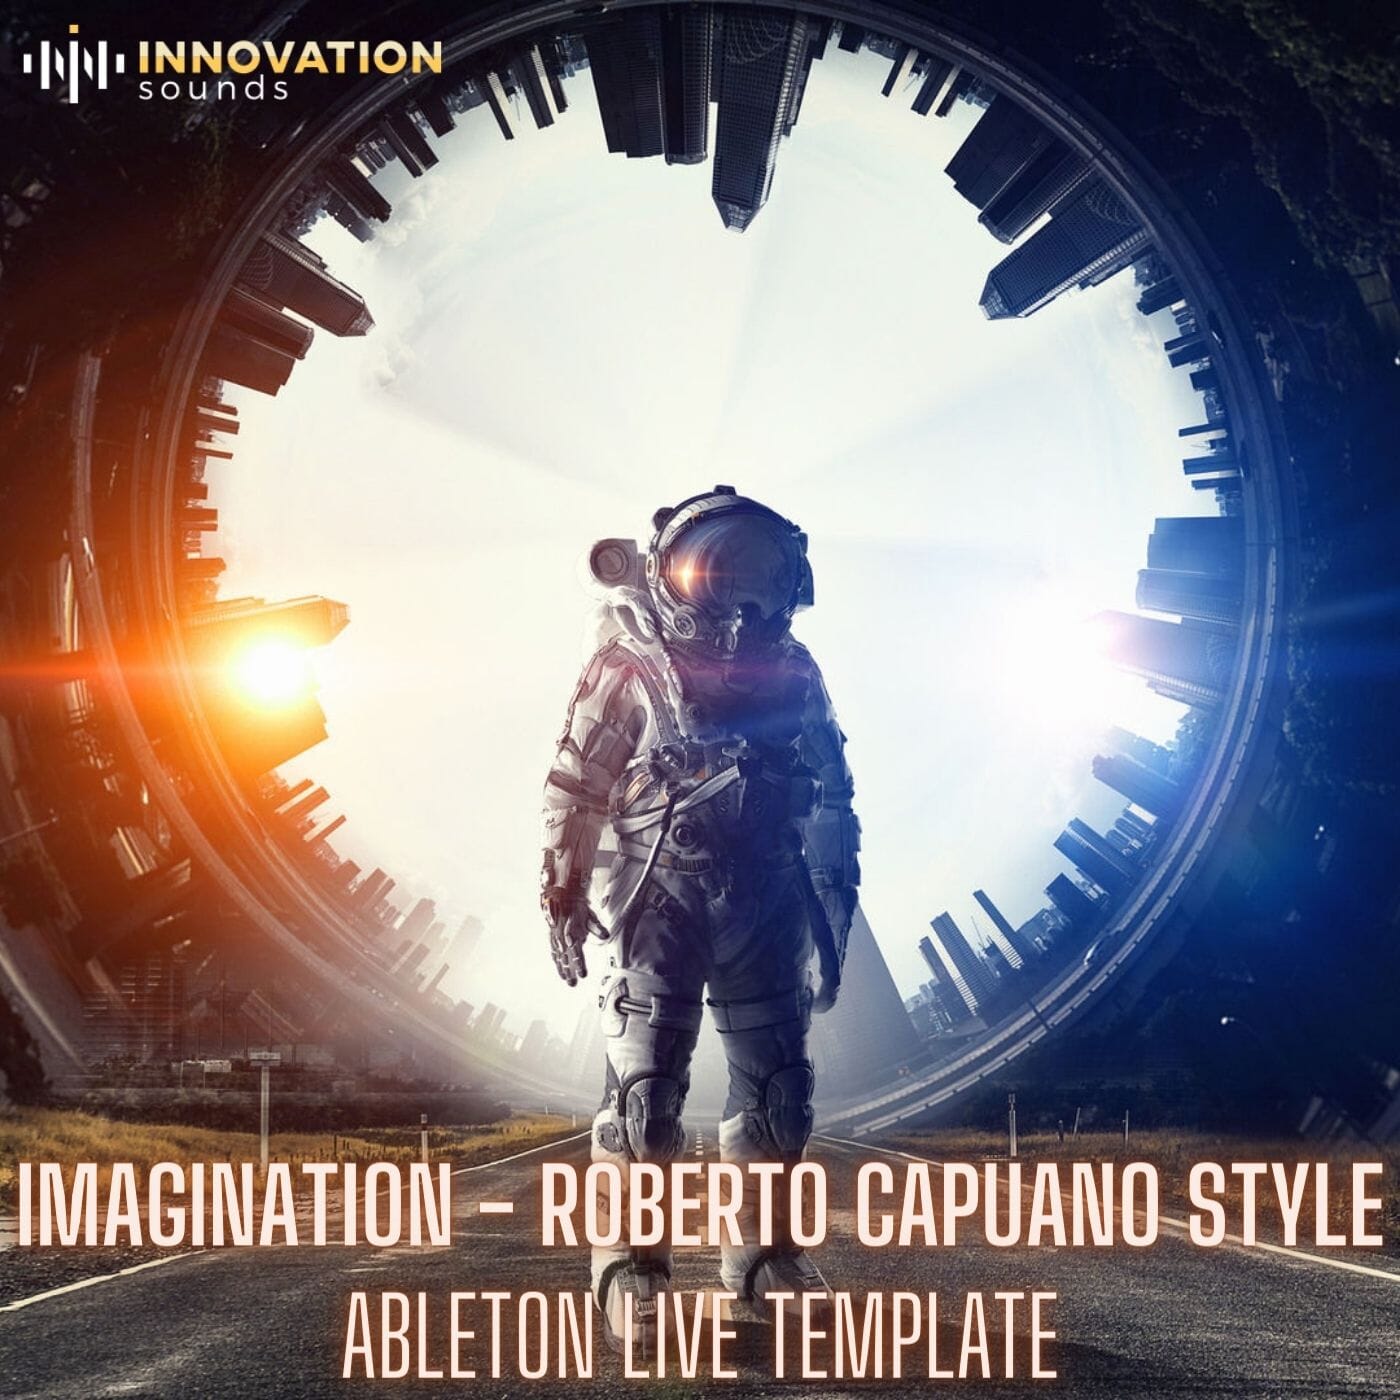 Imagination - Roberto Capuano Style Ableton 11 Techno Template Sample Pack Innovation Sounds